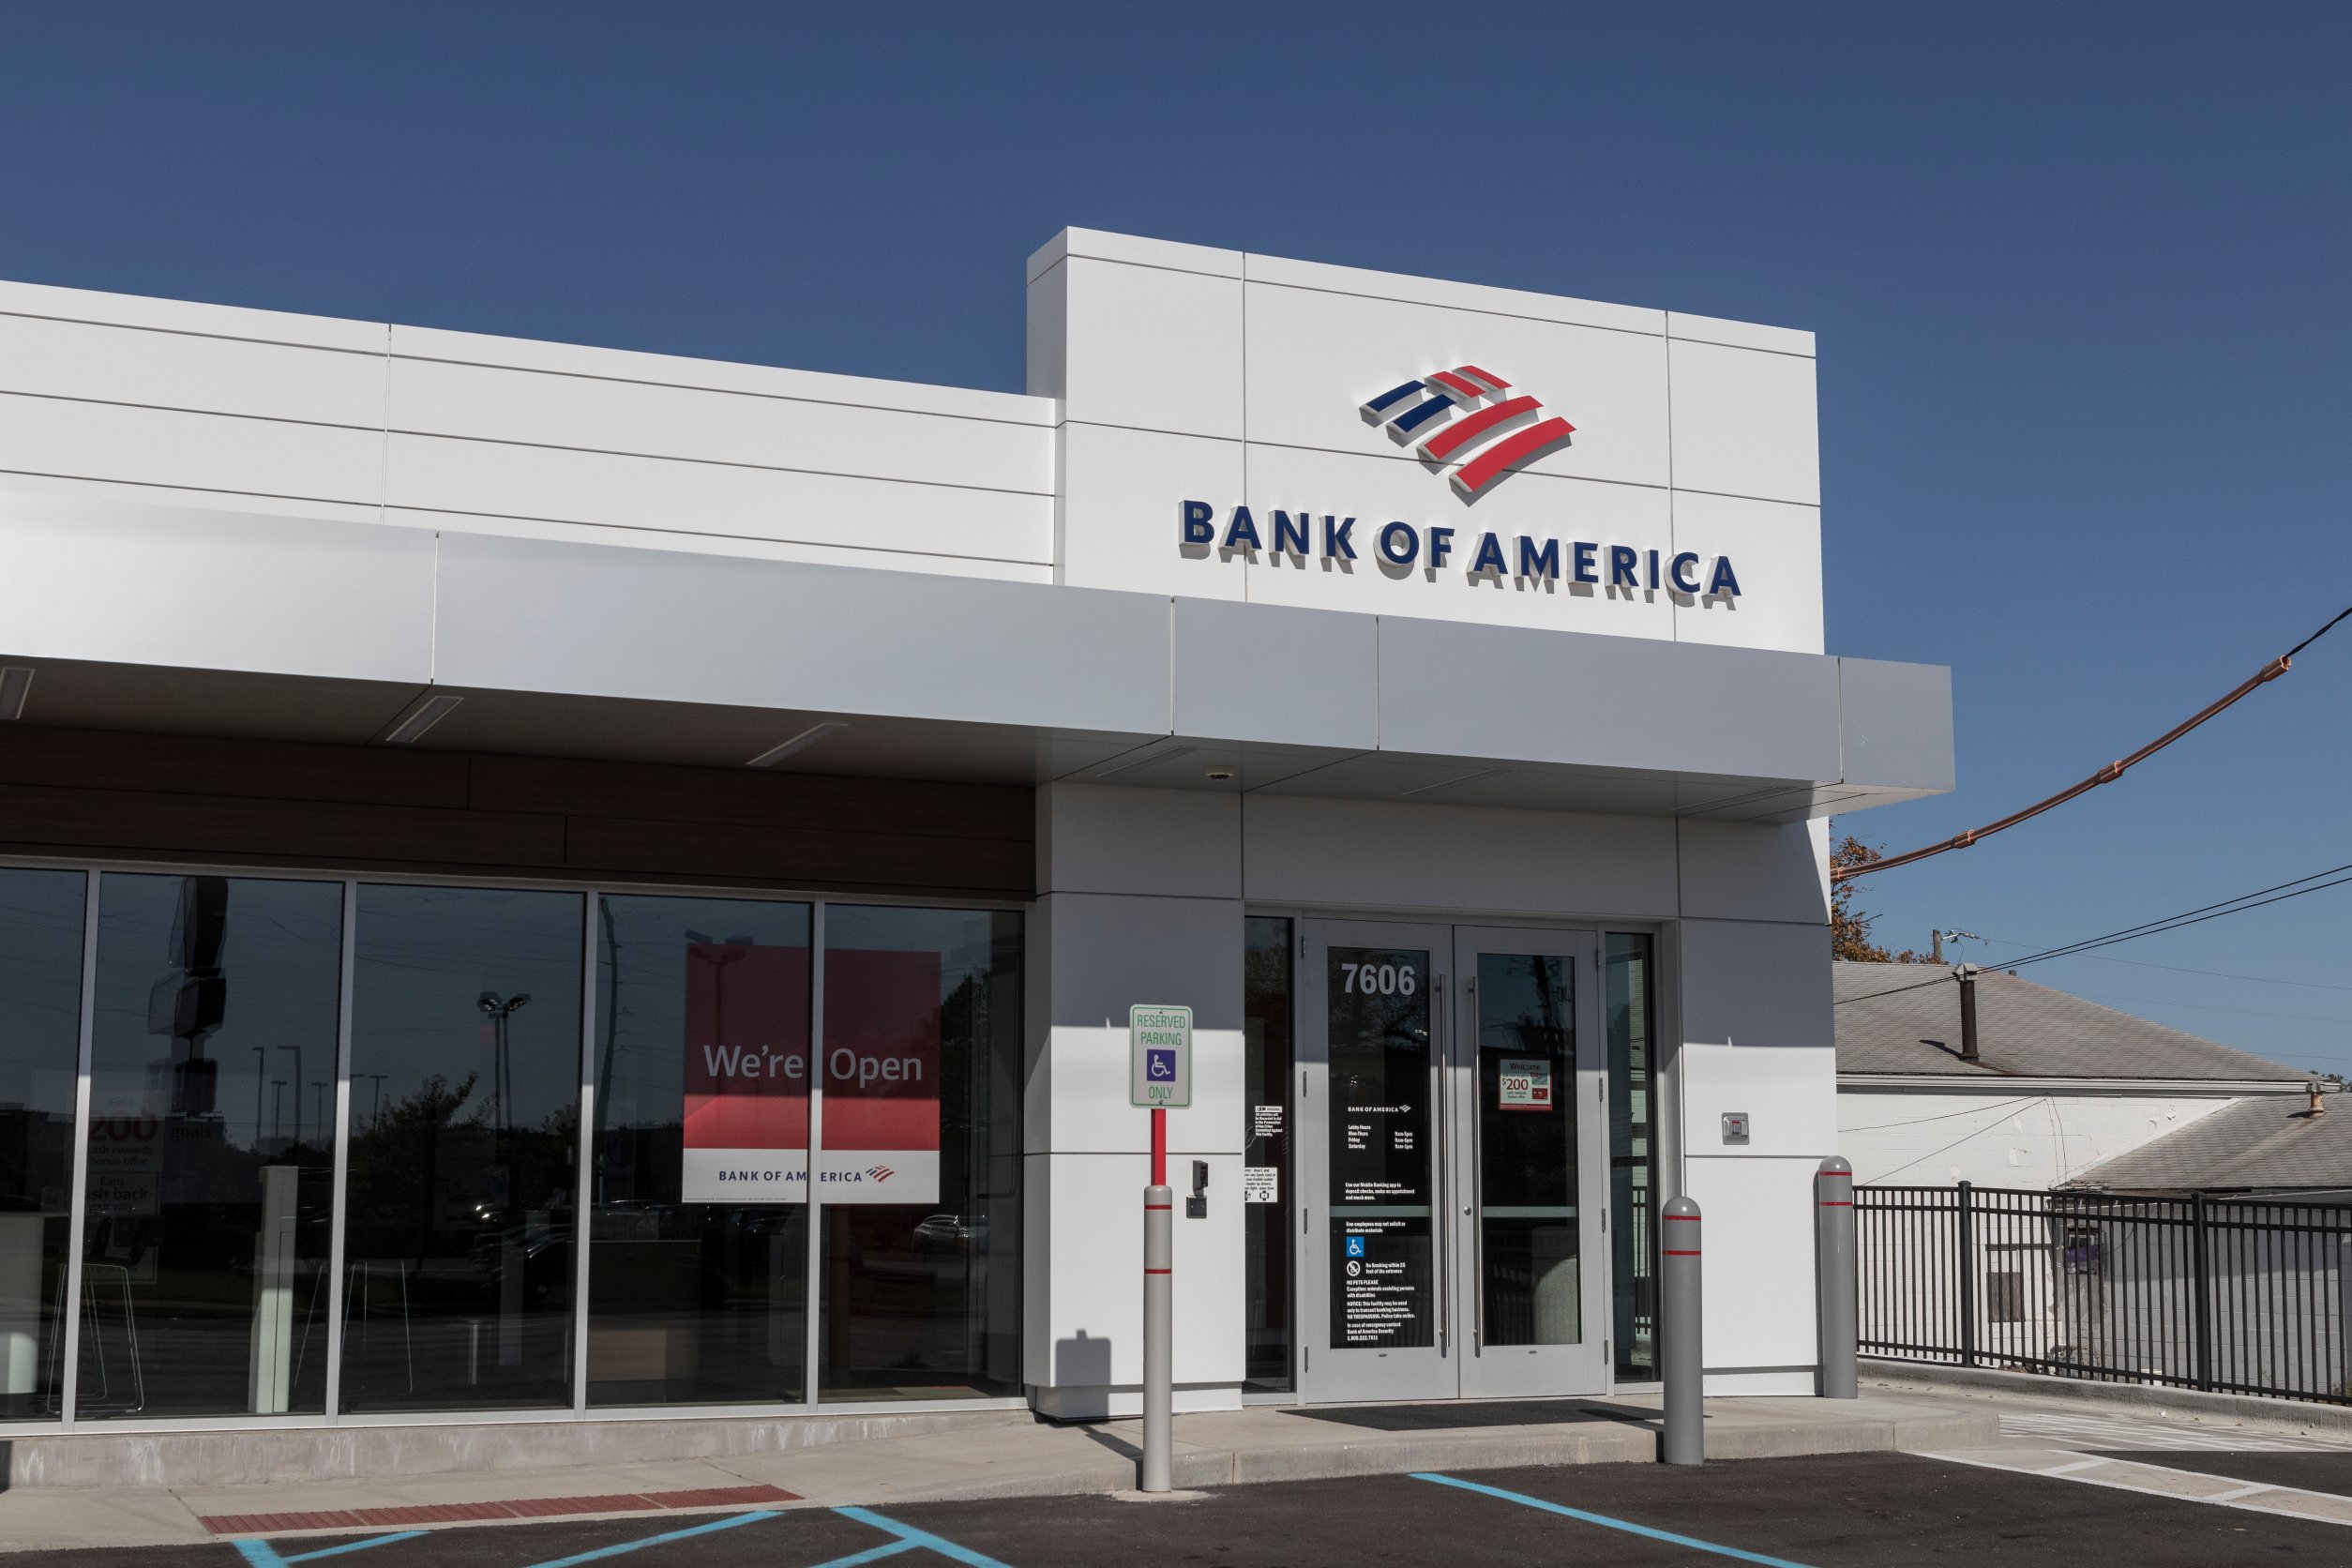 Pro says buy Bank of America stock after Fed signalled 4.6% terminal rate - Rich Tv